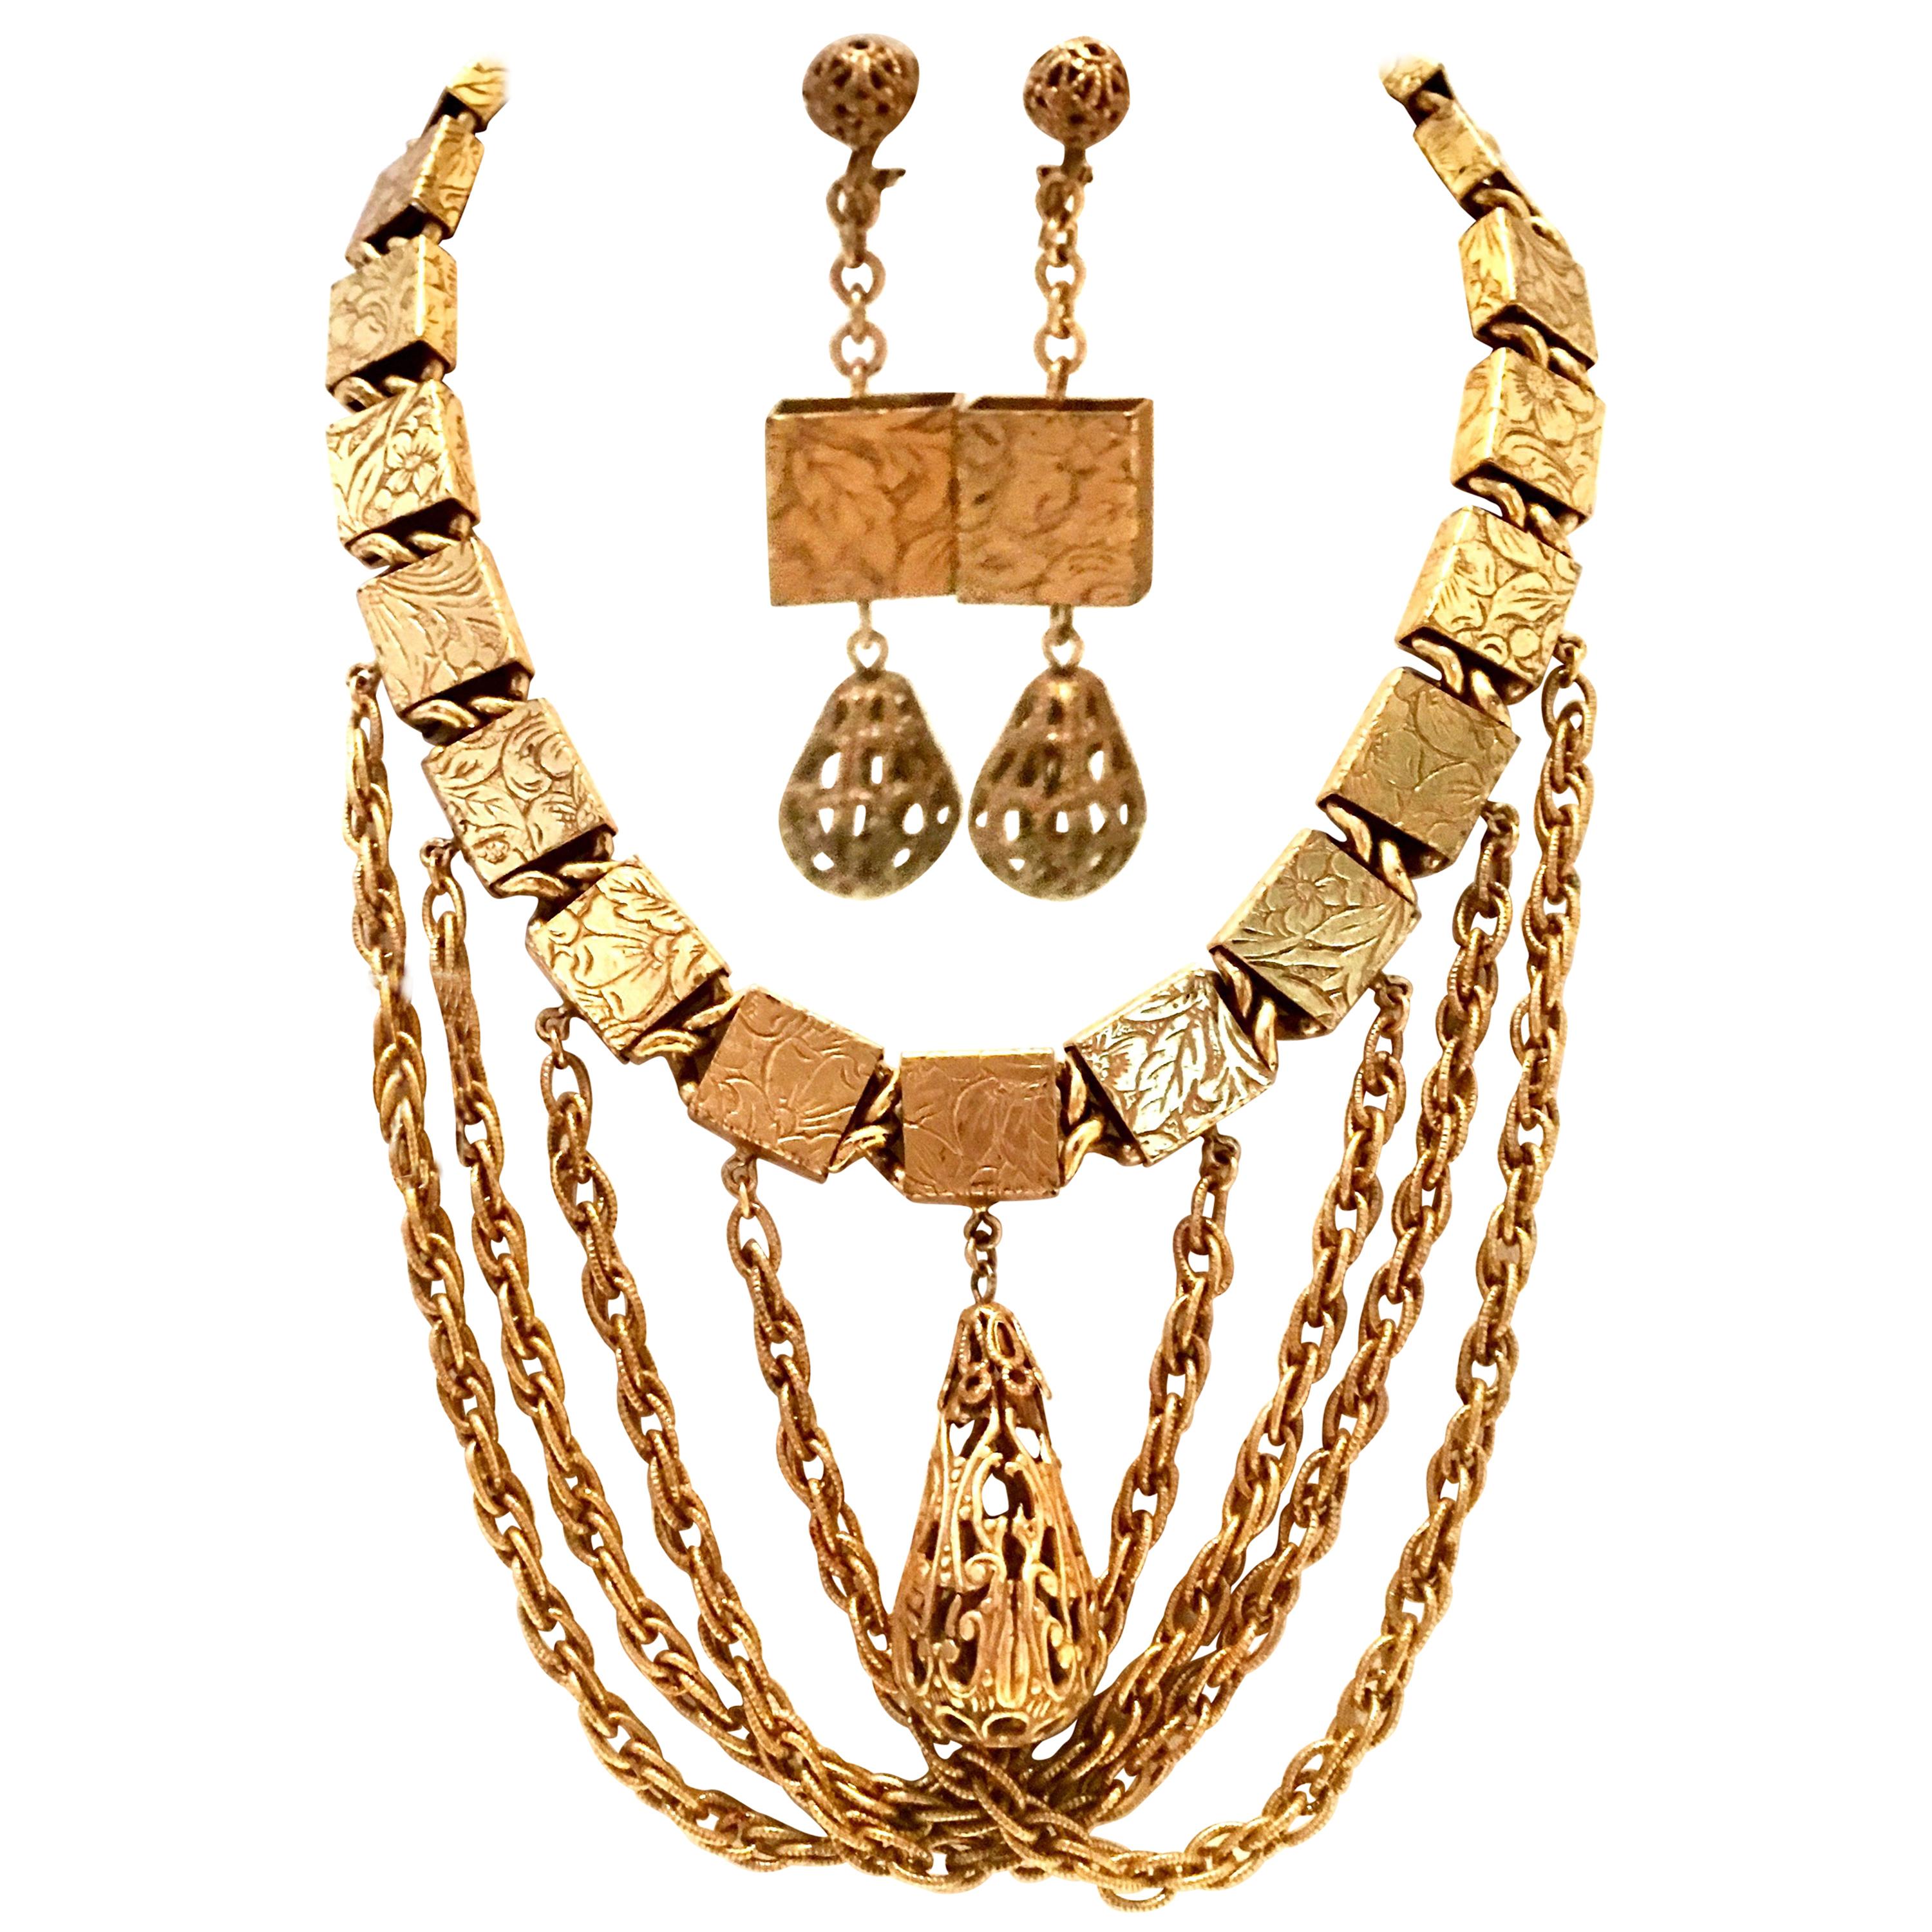 20th Century Art Nouveau Gold Book Chain Choker Style Necklace & Earrings S/3 For Sale